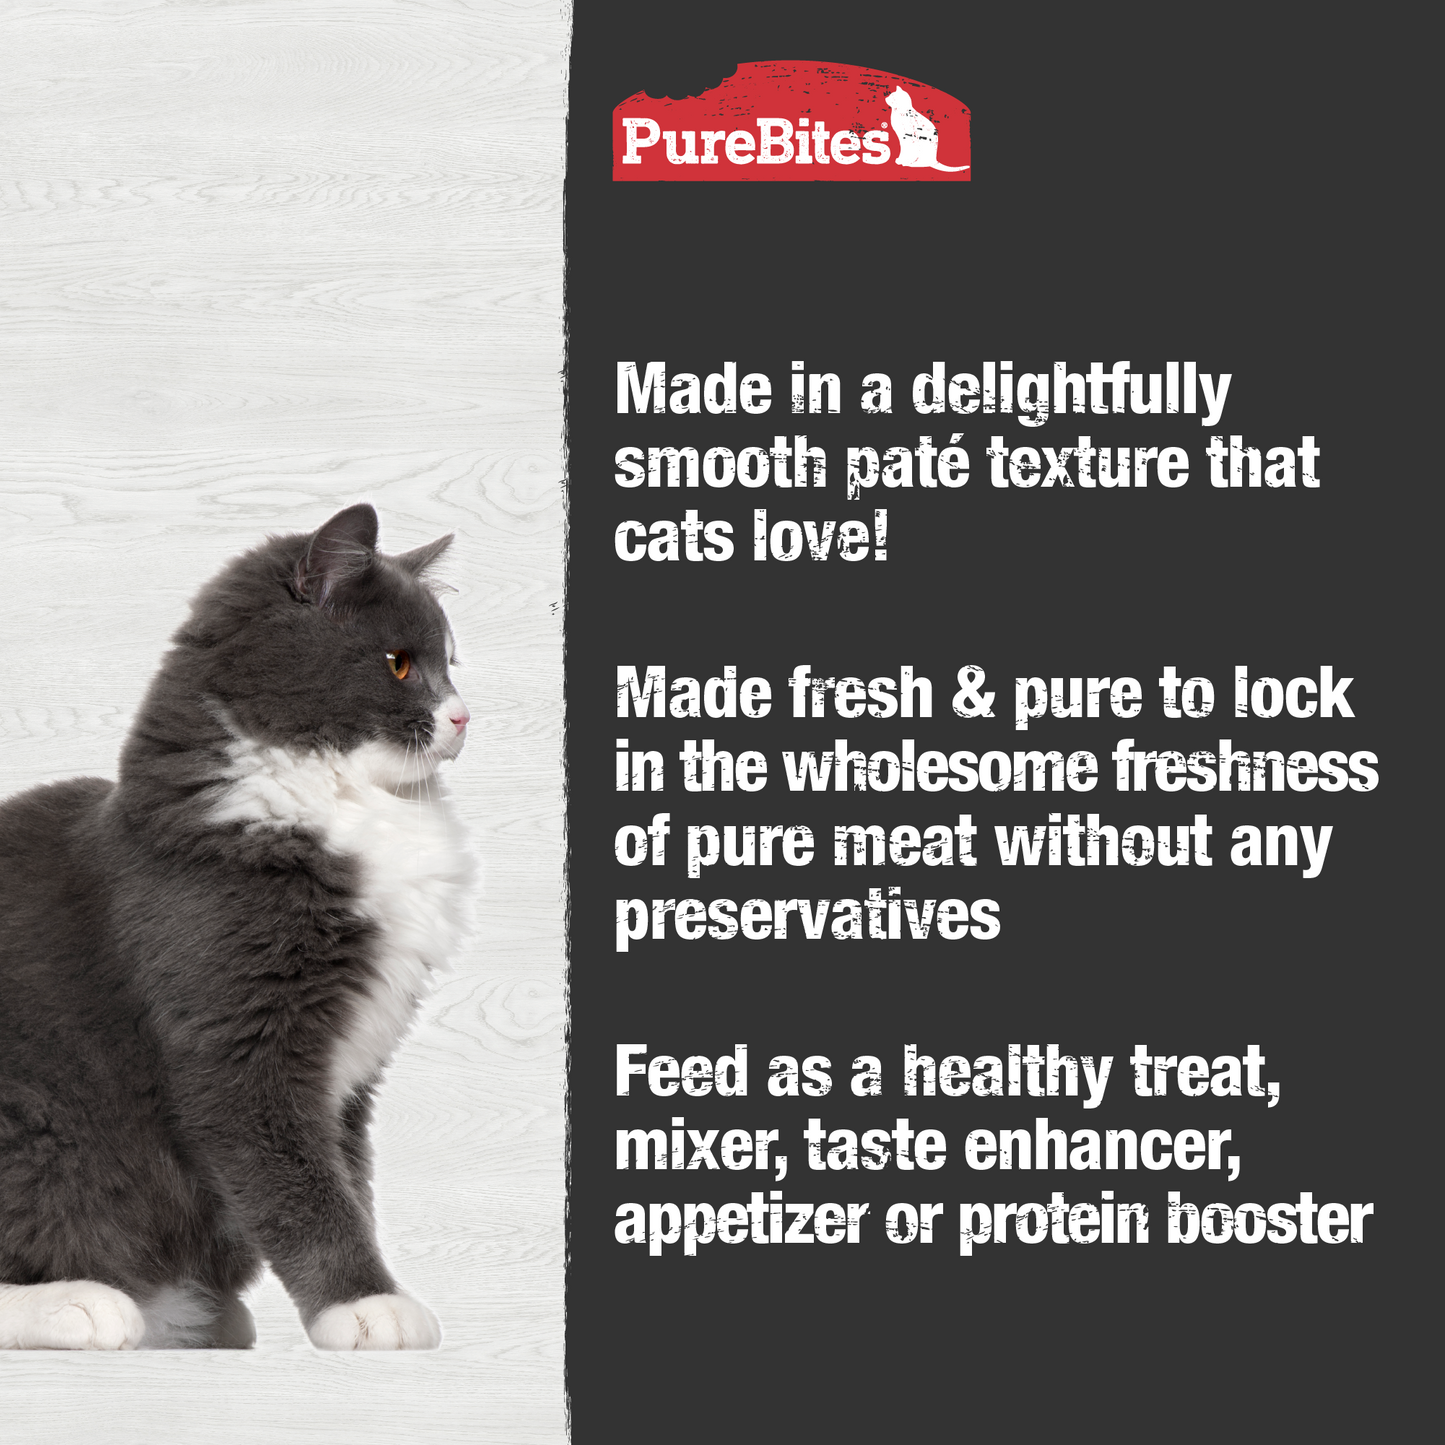 Made fresh & pure means more protein and nutrients packed into every can. The chicken in our patés is delicately steamed to help preserve the ingredient's taste, and nutrition, and mirror a cat's ancestral diet